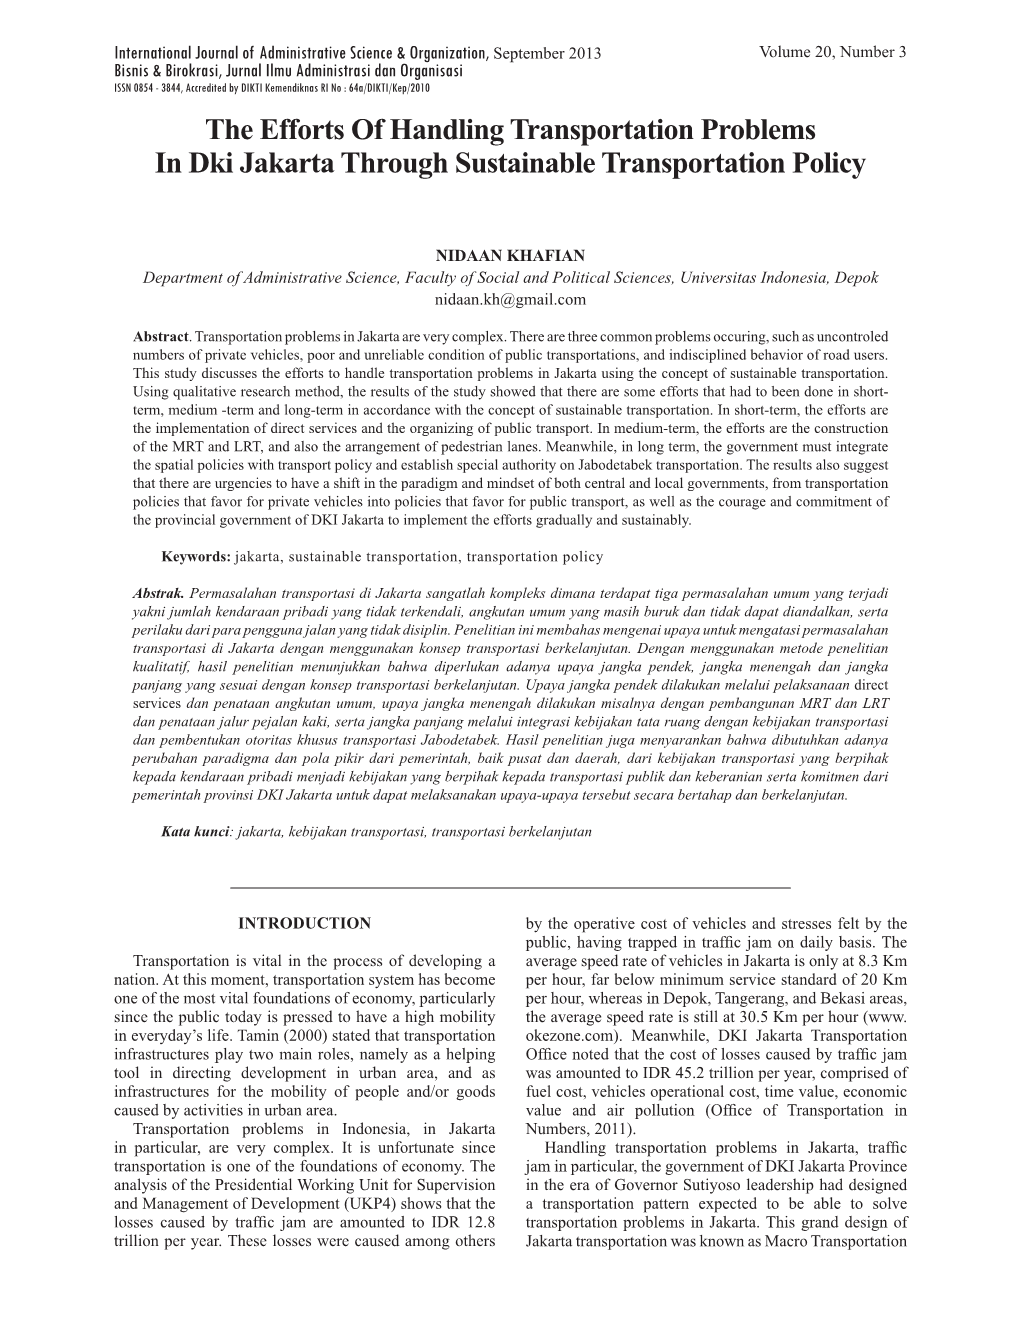 The Efforts of Handling Transportation Problems in Dki Jakarta Through Sustainable Transportation Policy